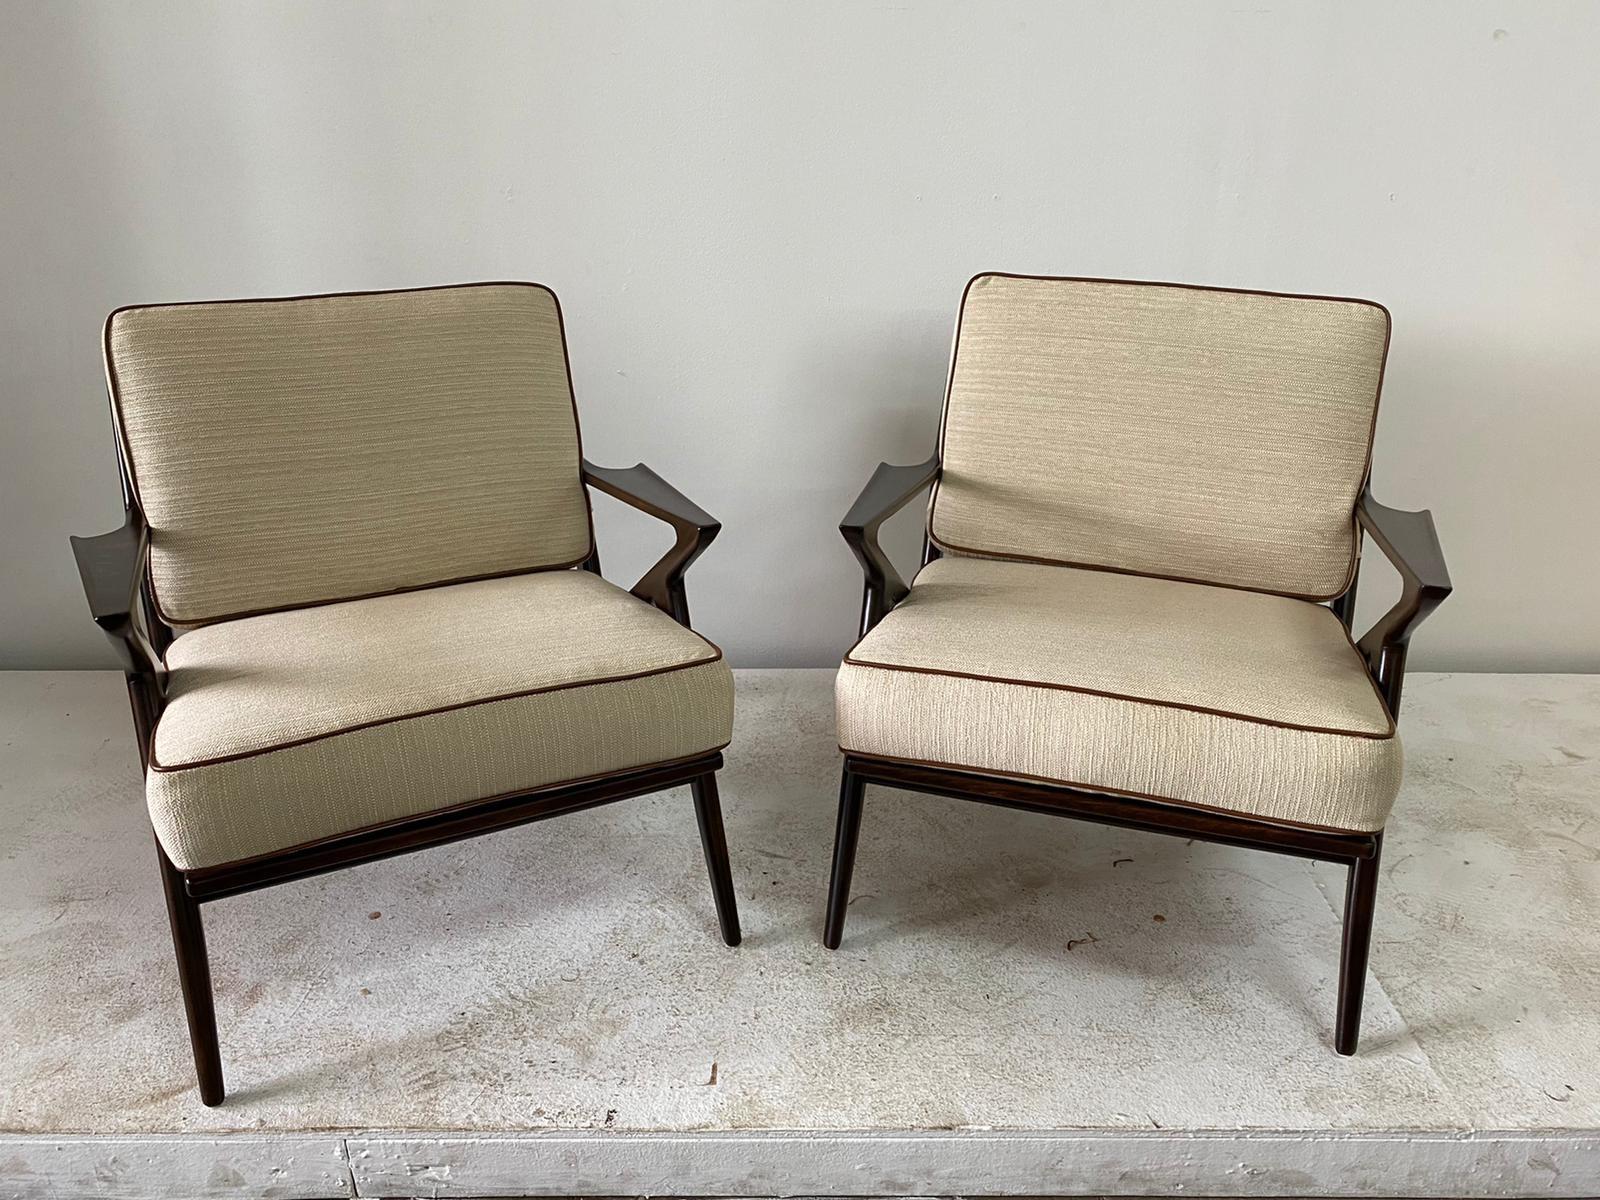 Stunning pair of Danish modern lounge chairs designed by Poul Jensen for Selig in Denmark, circa 1960s. Known as the “Z” chair for its exclusive armrests that connect to the legs and give the illusion of a letter Z. These chairs Stand out for the